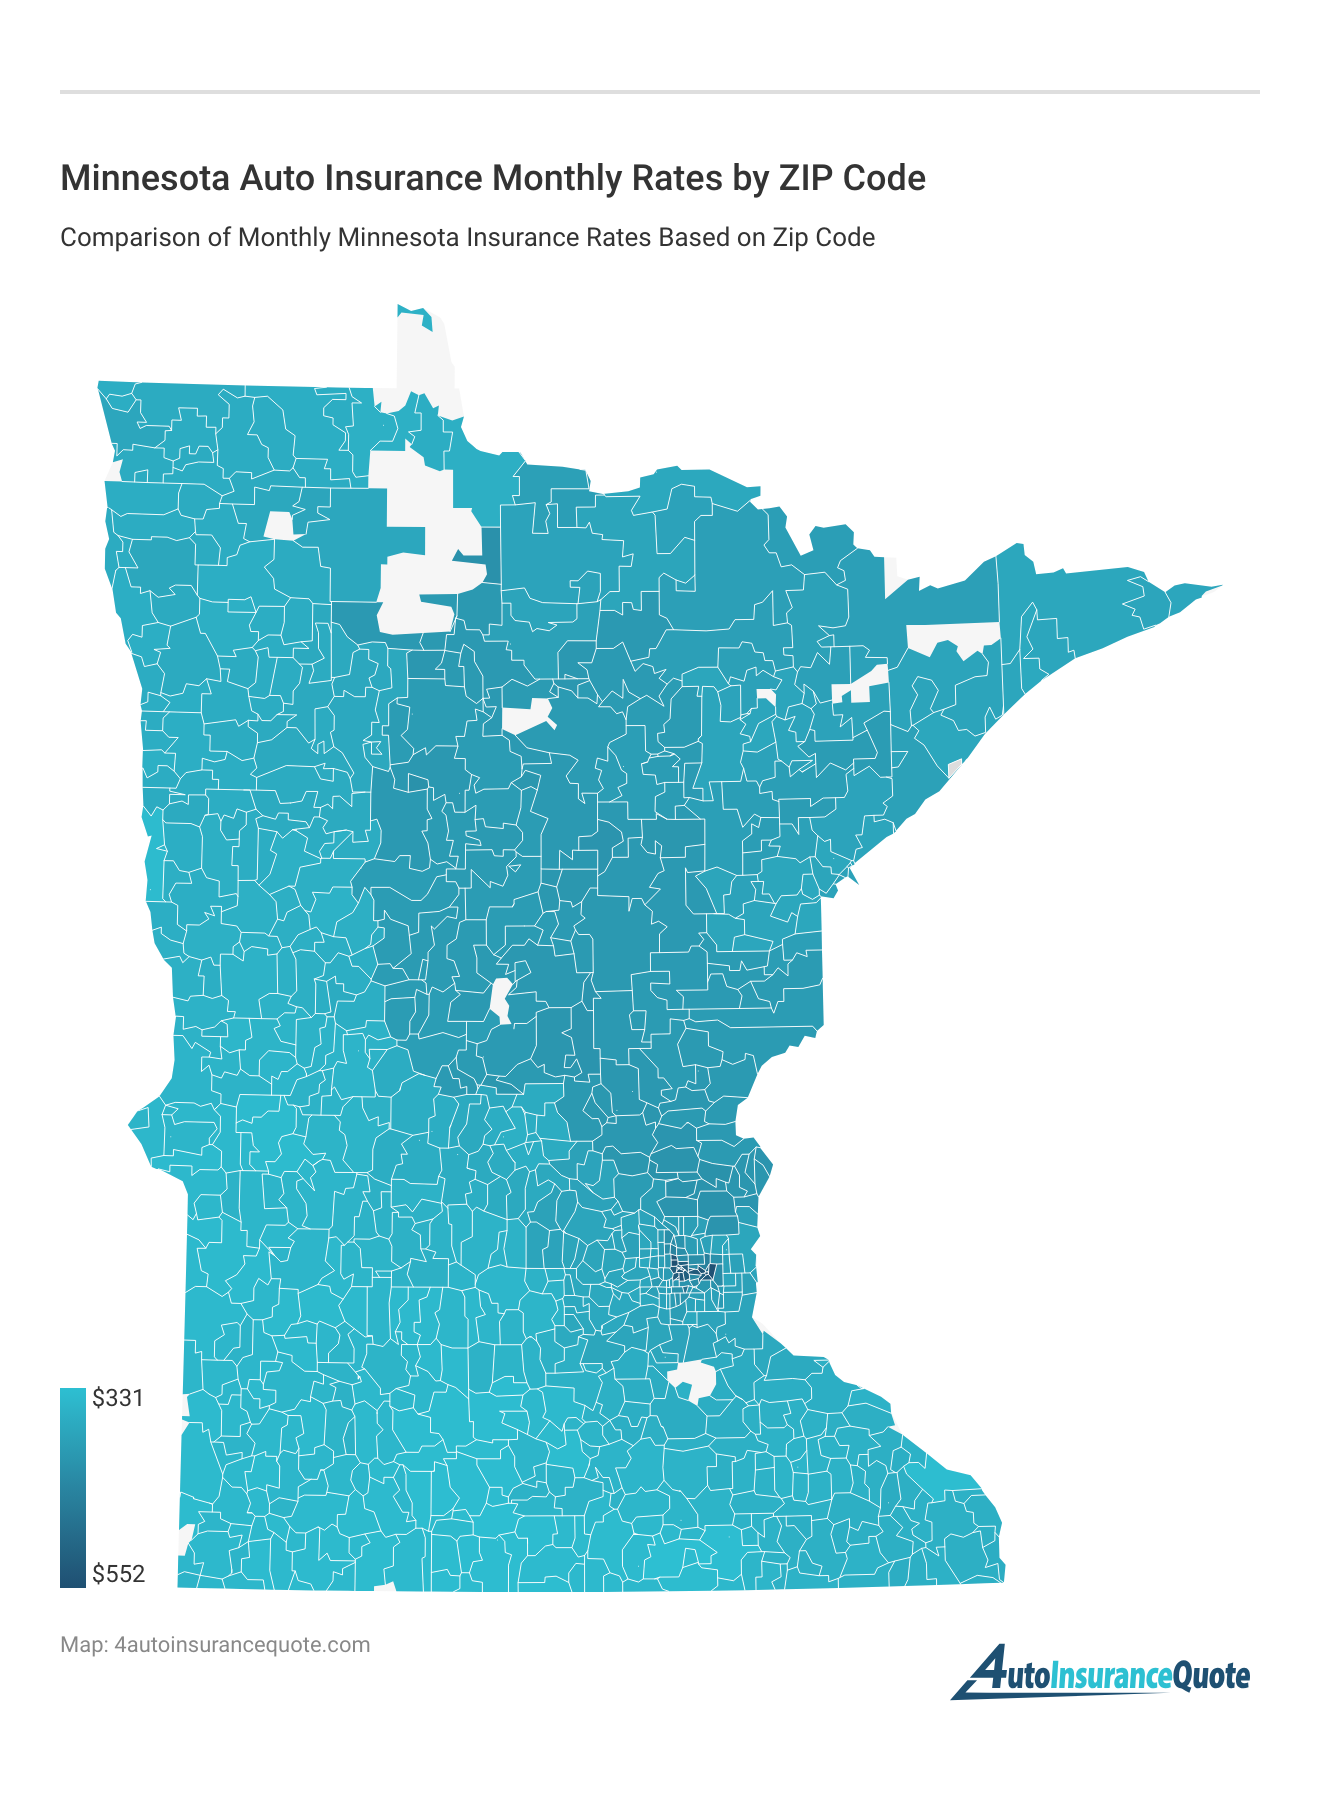 <h3>Minnesota Auto Insurance Monthly Rates by ZIP Code</h3>